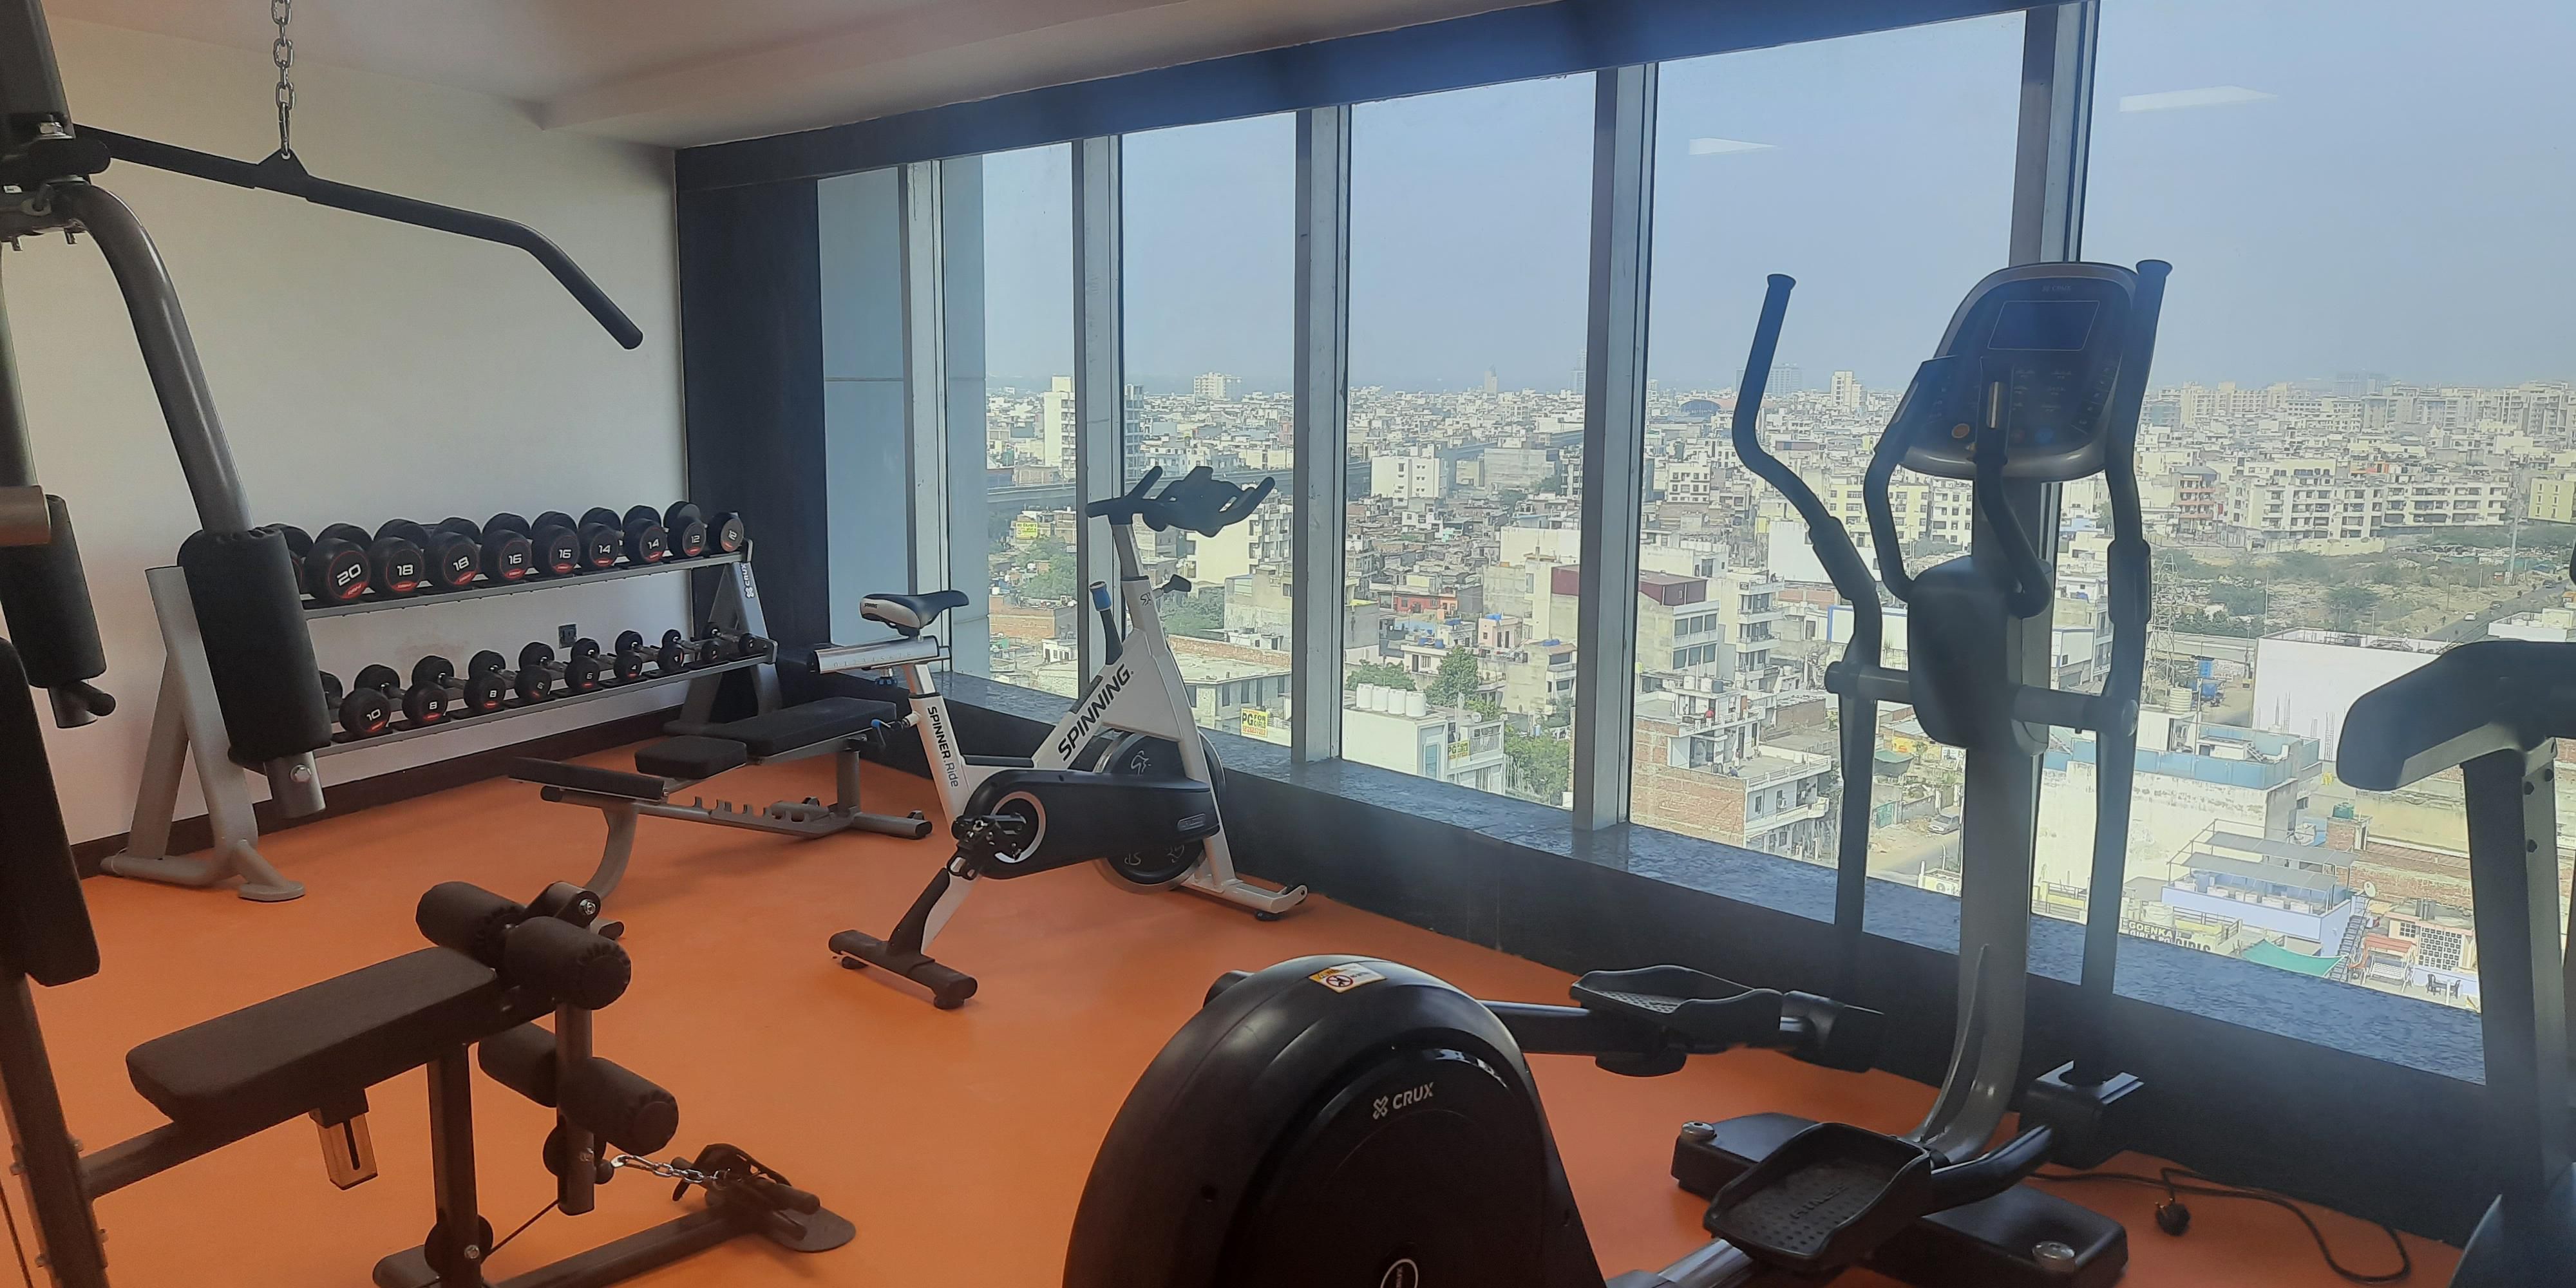 Stay committed to your fitness regime, even while travelling, with our 24/7 gym; located at the 11th floor, workout overlooking a scenic view of the city. Equipped with state-of-the-art fitness equipment, ranging from cardio machines, weights, cycle, cross trainer, dumbbell rack and yoga mats, and qualified trainers to guide and assist.